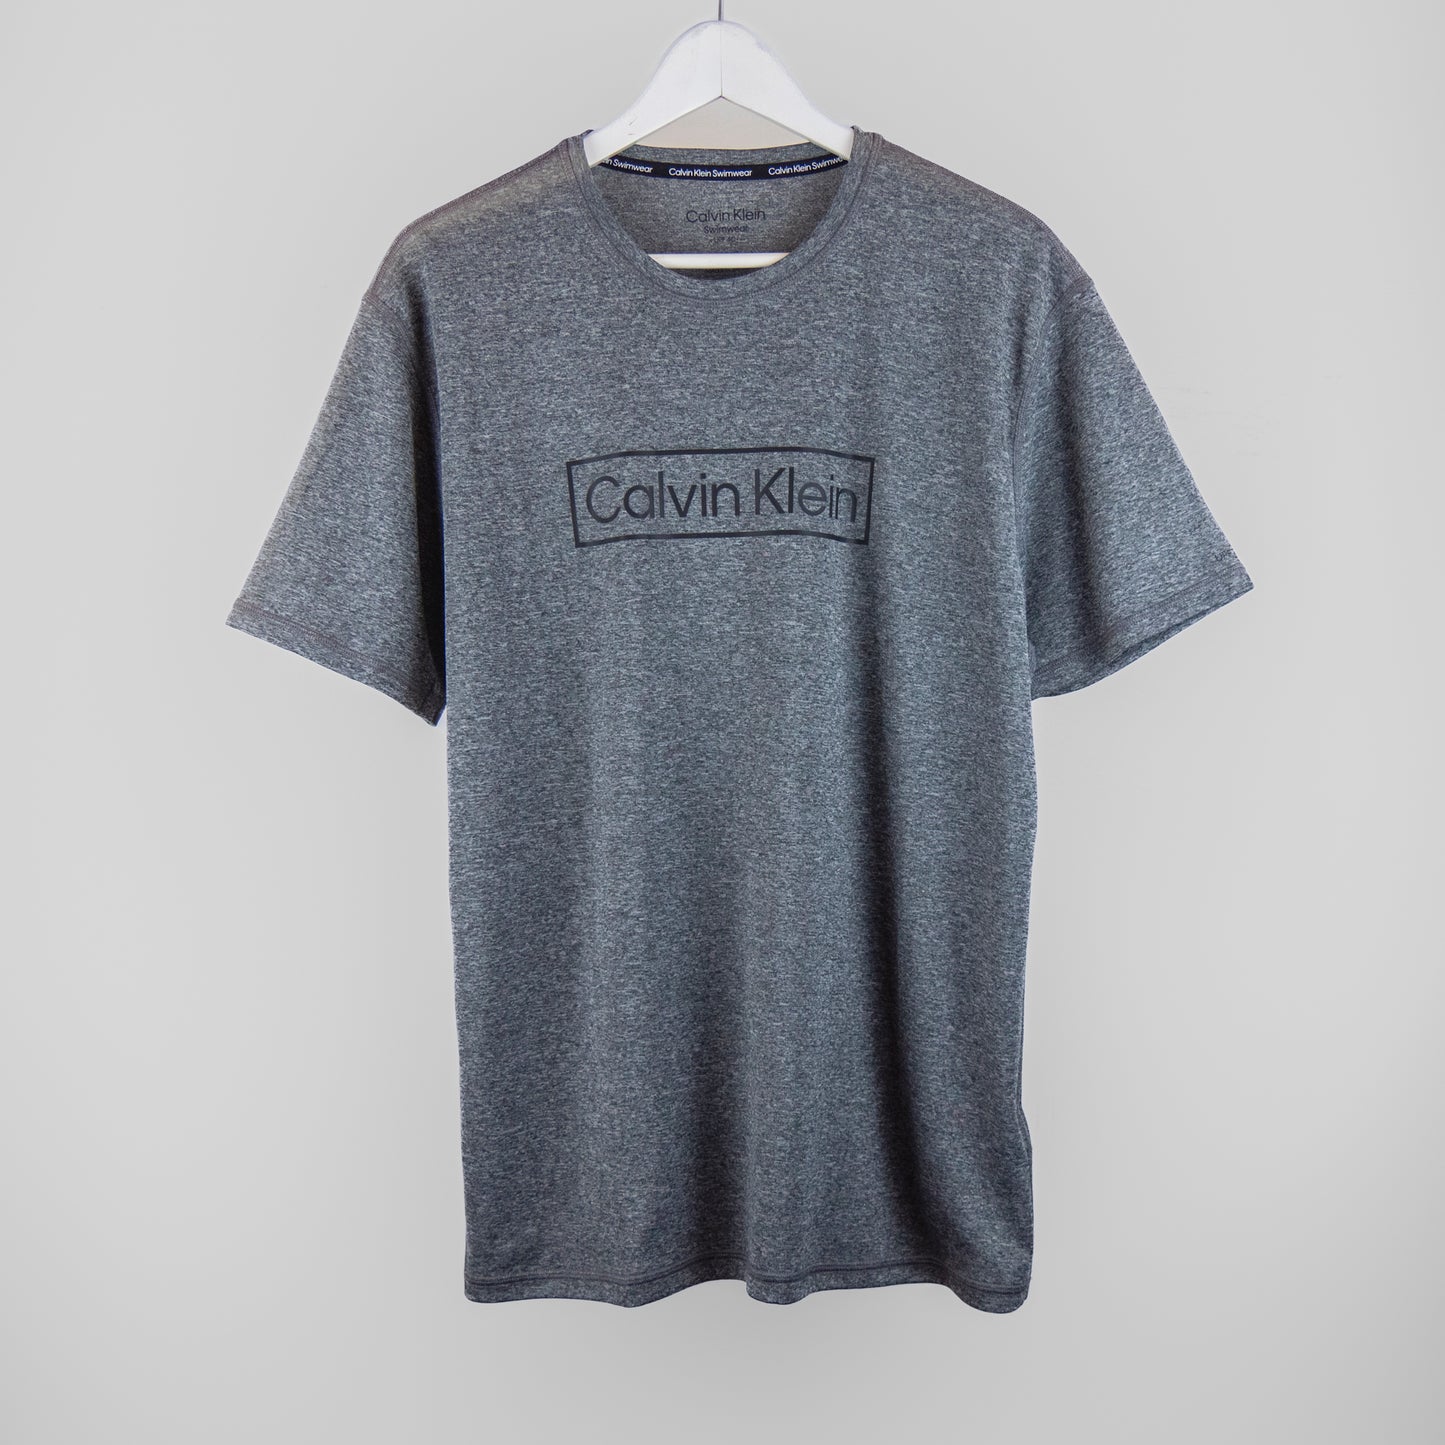 Calvin Klein - Light Weight Quick Dry Short Sleeve 40+ UPF Protection - Heather Grey